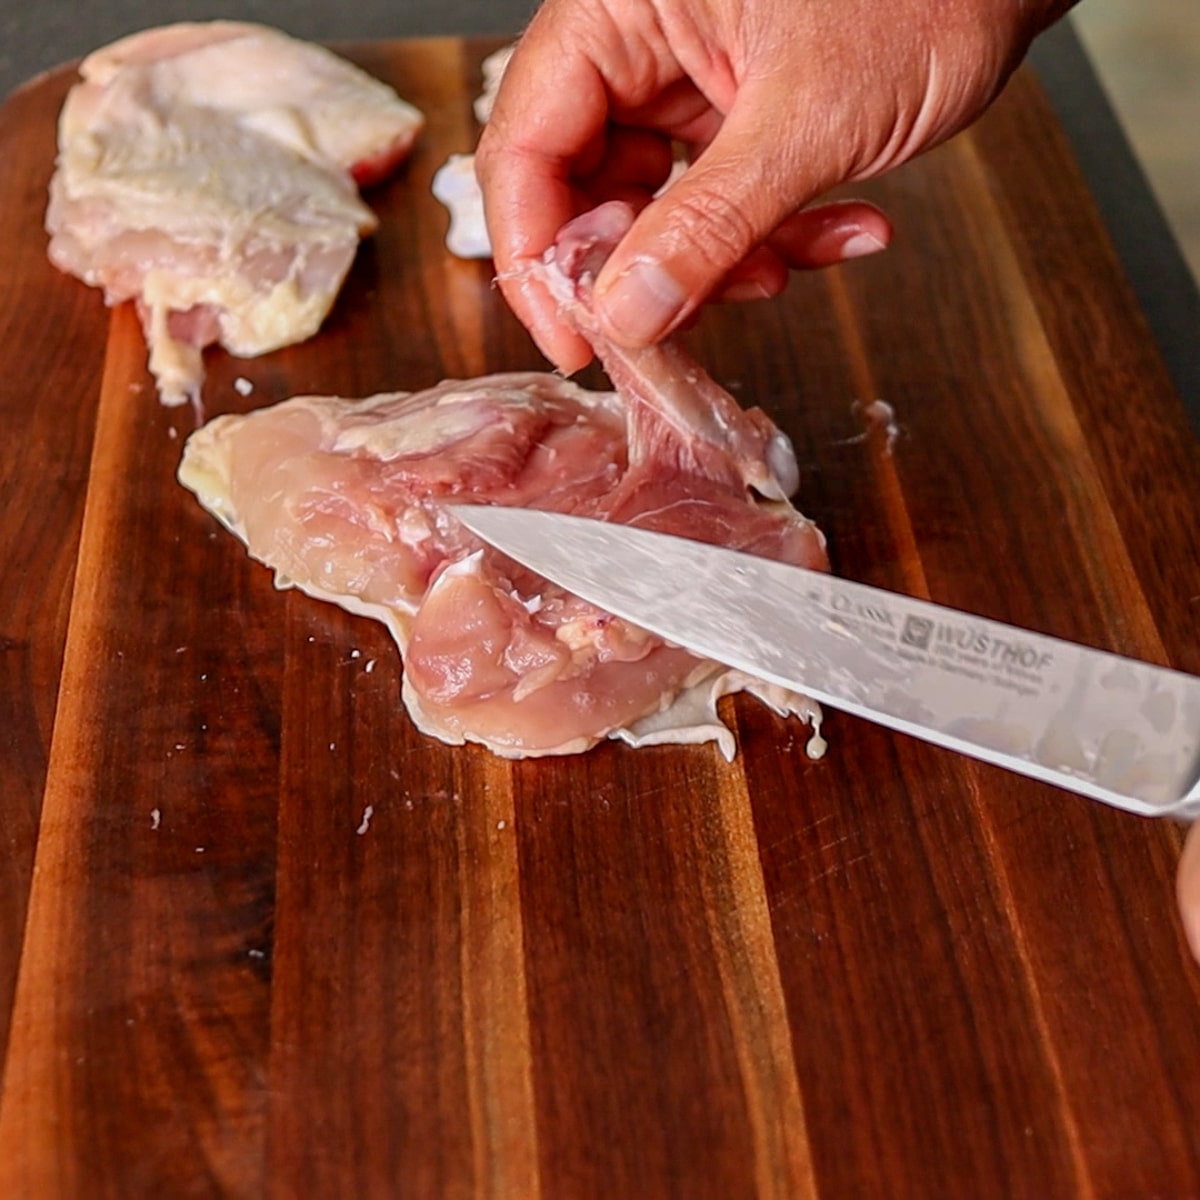 removing the bone from the chicken thigh